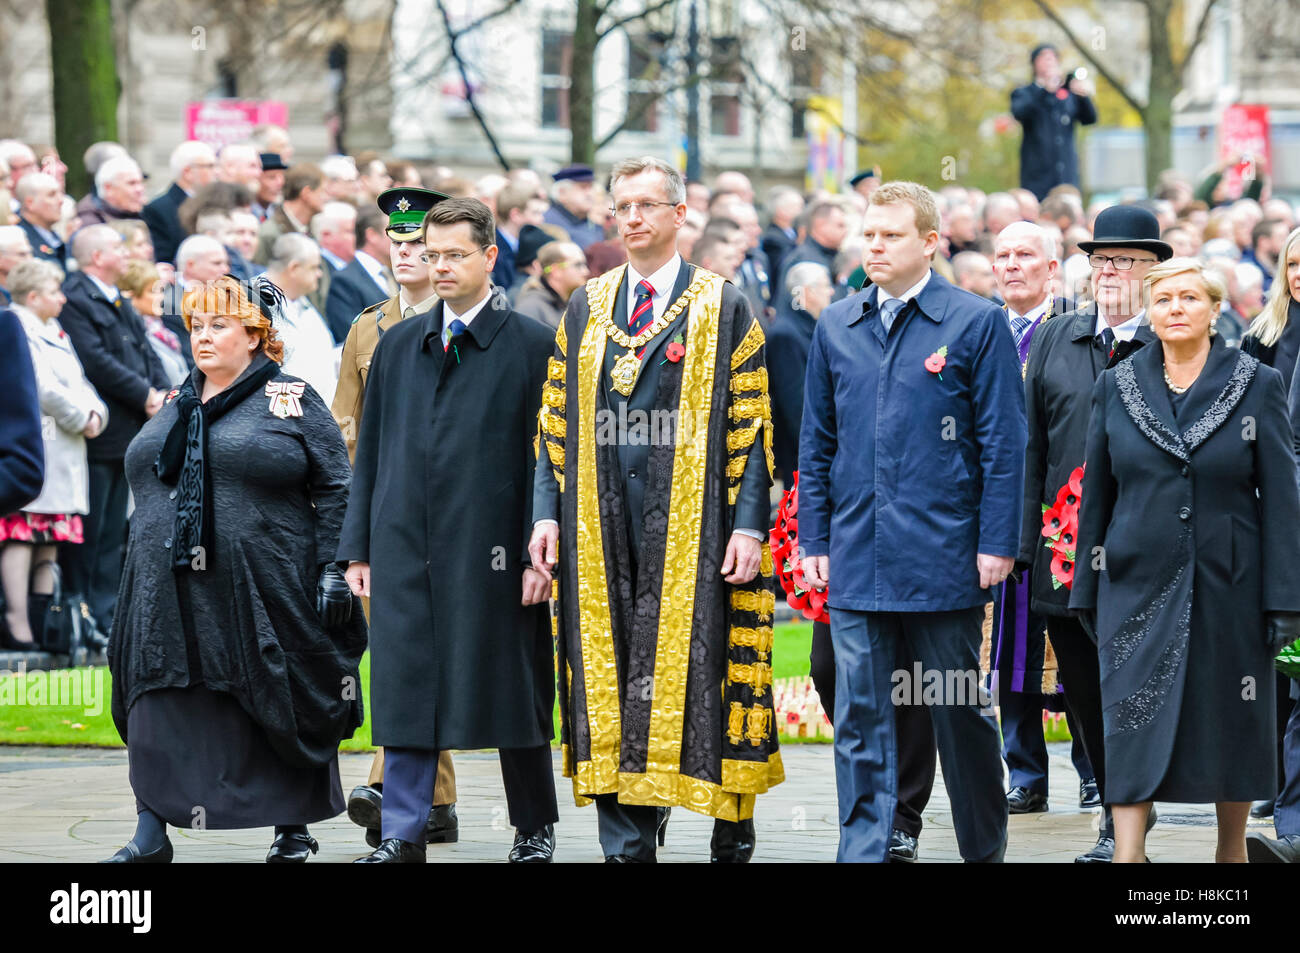 Belfast, Northern, Ireland. 13th Nov, 2016. Lord Lieutenant of Belfast Fionnula Jay-O'Boyle, Secretary of State for Northern Ireland James Brokenshire MP, Lord Mayor of Belfast, Brian Kingson, and Representative of the American Consulate Mr T Douthett lead the procession for the Remembrance Sunday service at Belfast City Hall Cenotaph. Credit:  Stephen Barnes/Alamy Live News Stock Photo